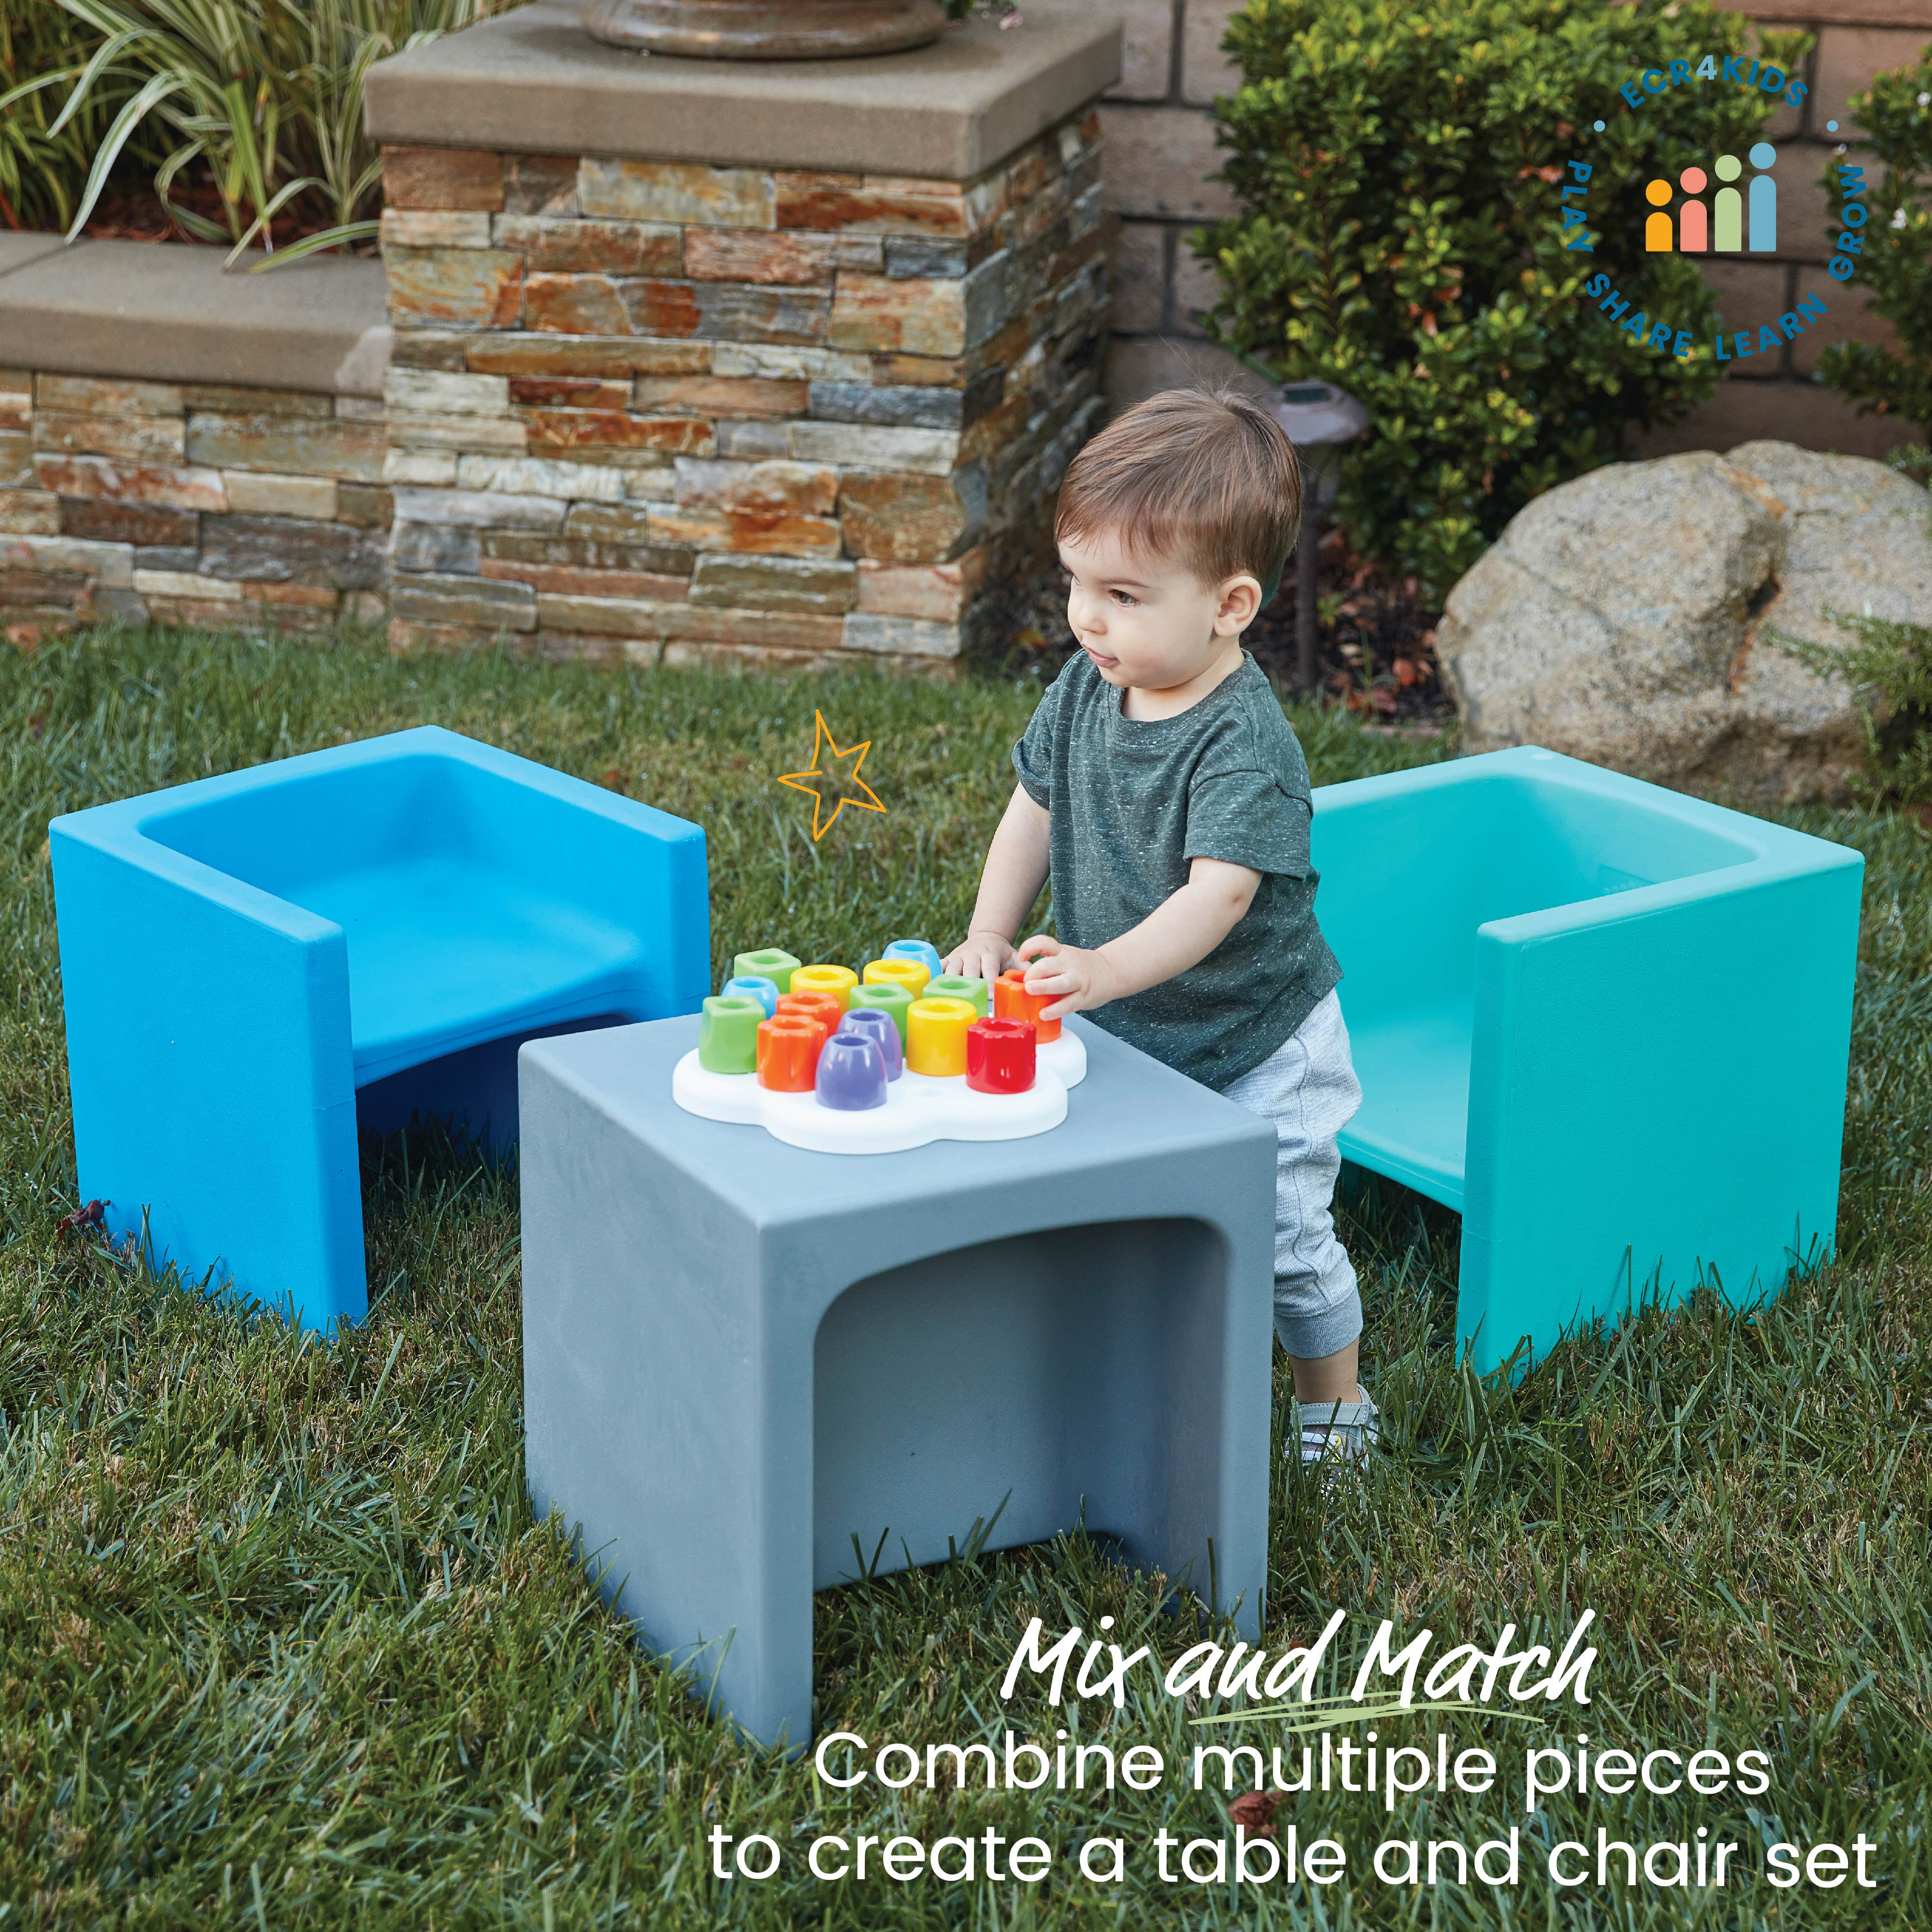 ECR4Kids Tri-Me 3-in-1 Cube Chair Portable Indoor//Outdoor Play Seat or Table for Kids and Toddlers Green